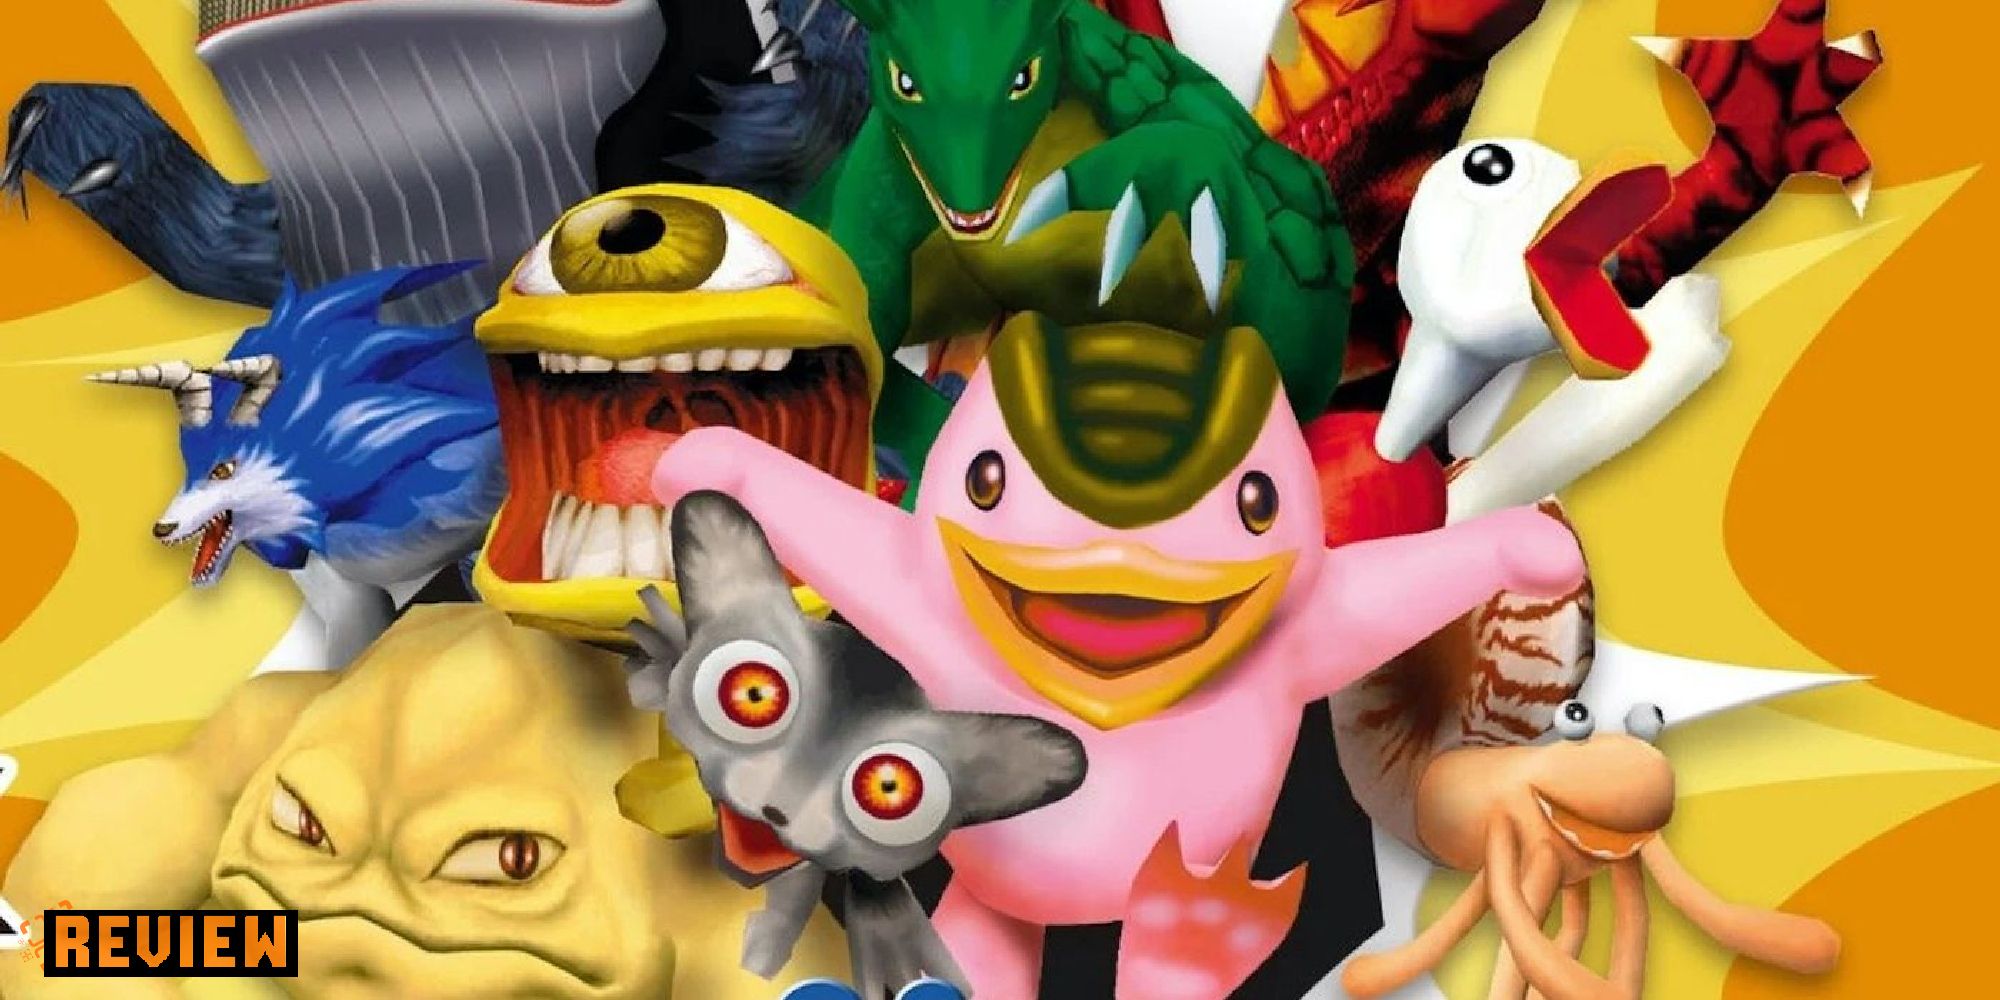 Monster Rancher 1 & 2 DX review